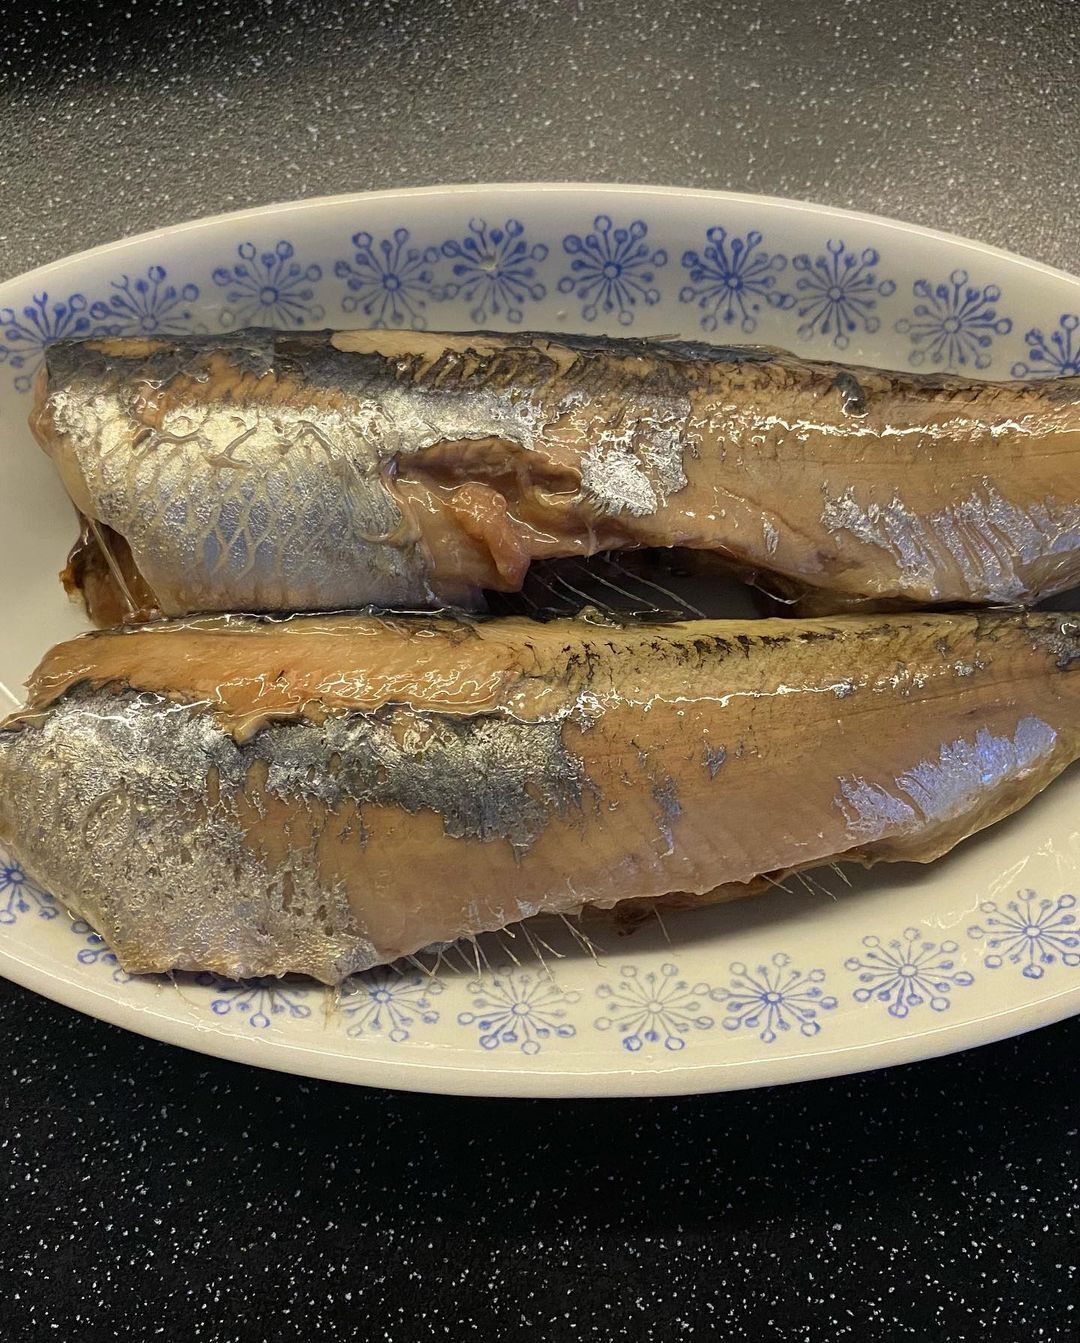 Herring fillets for making appetizers